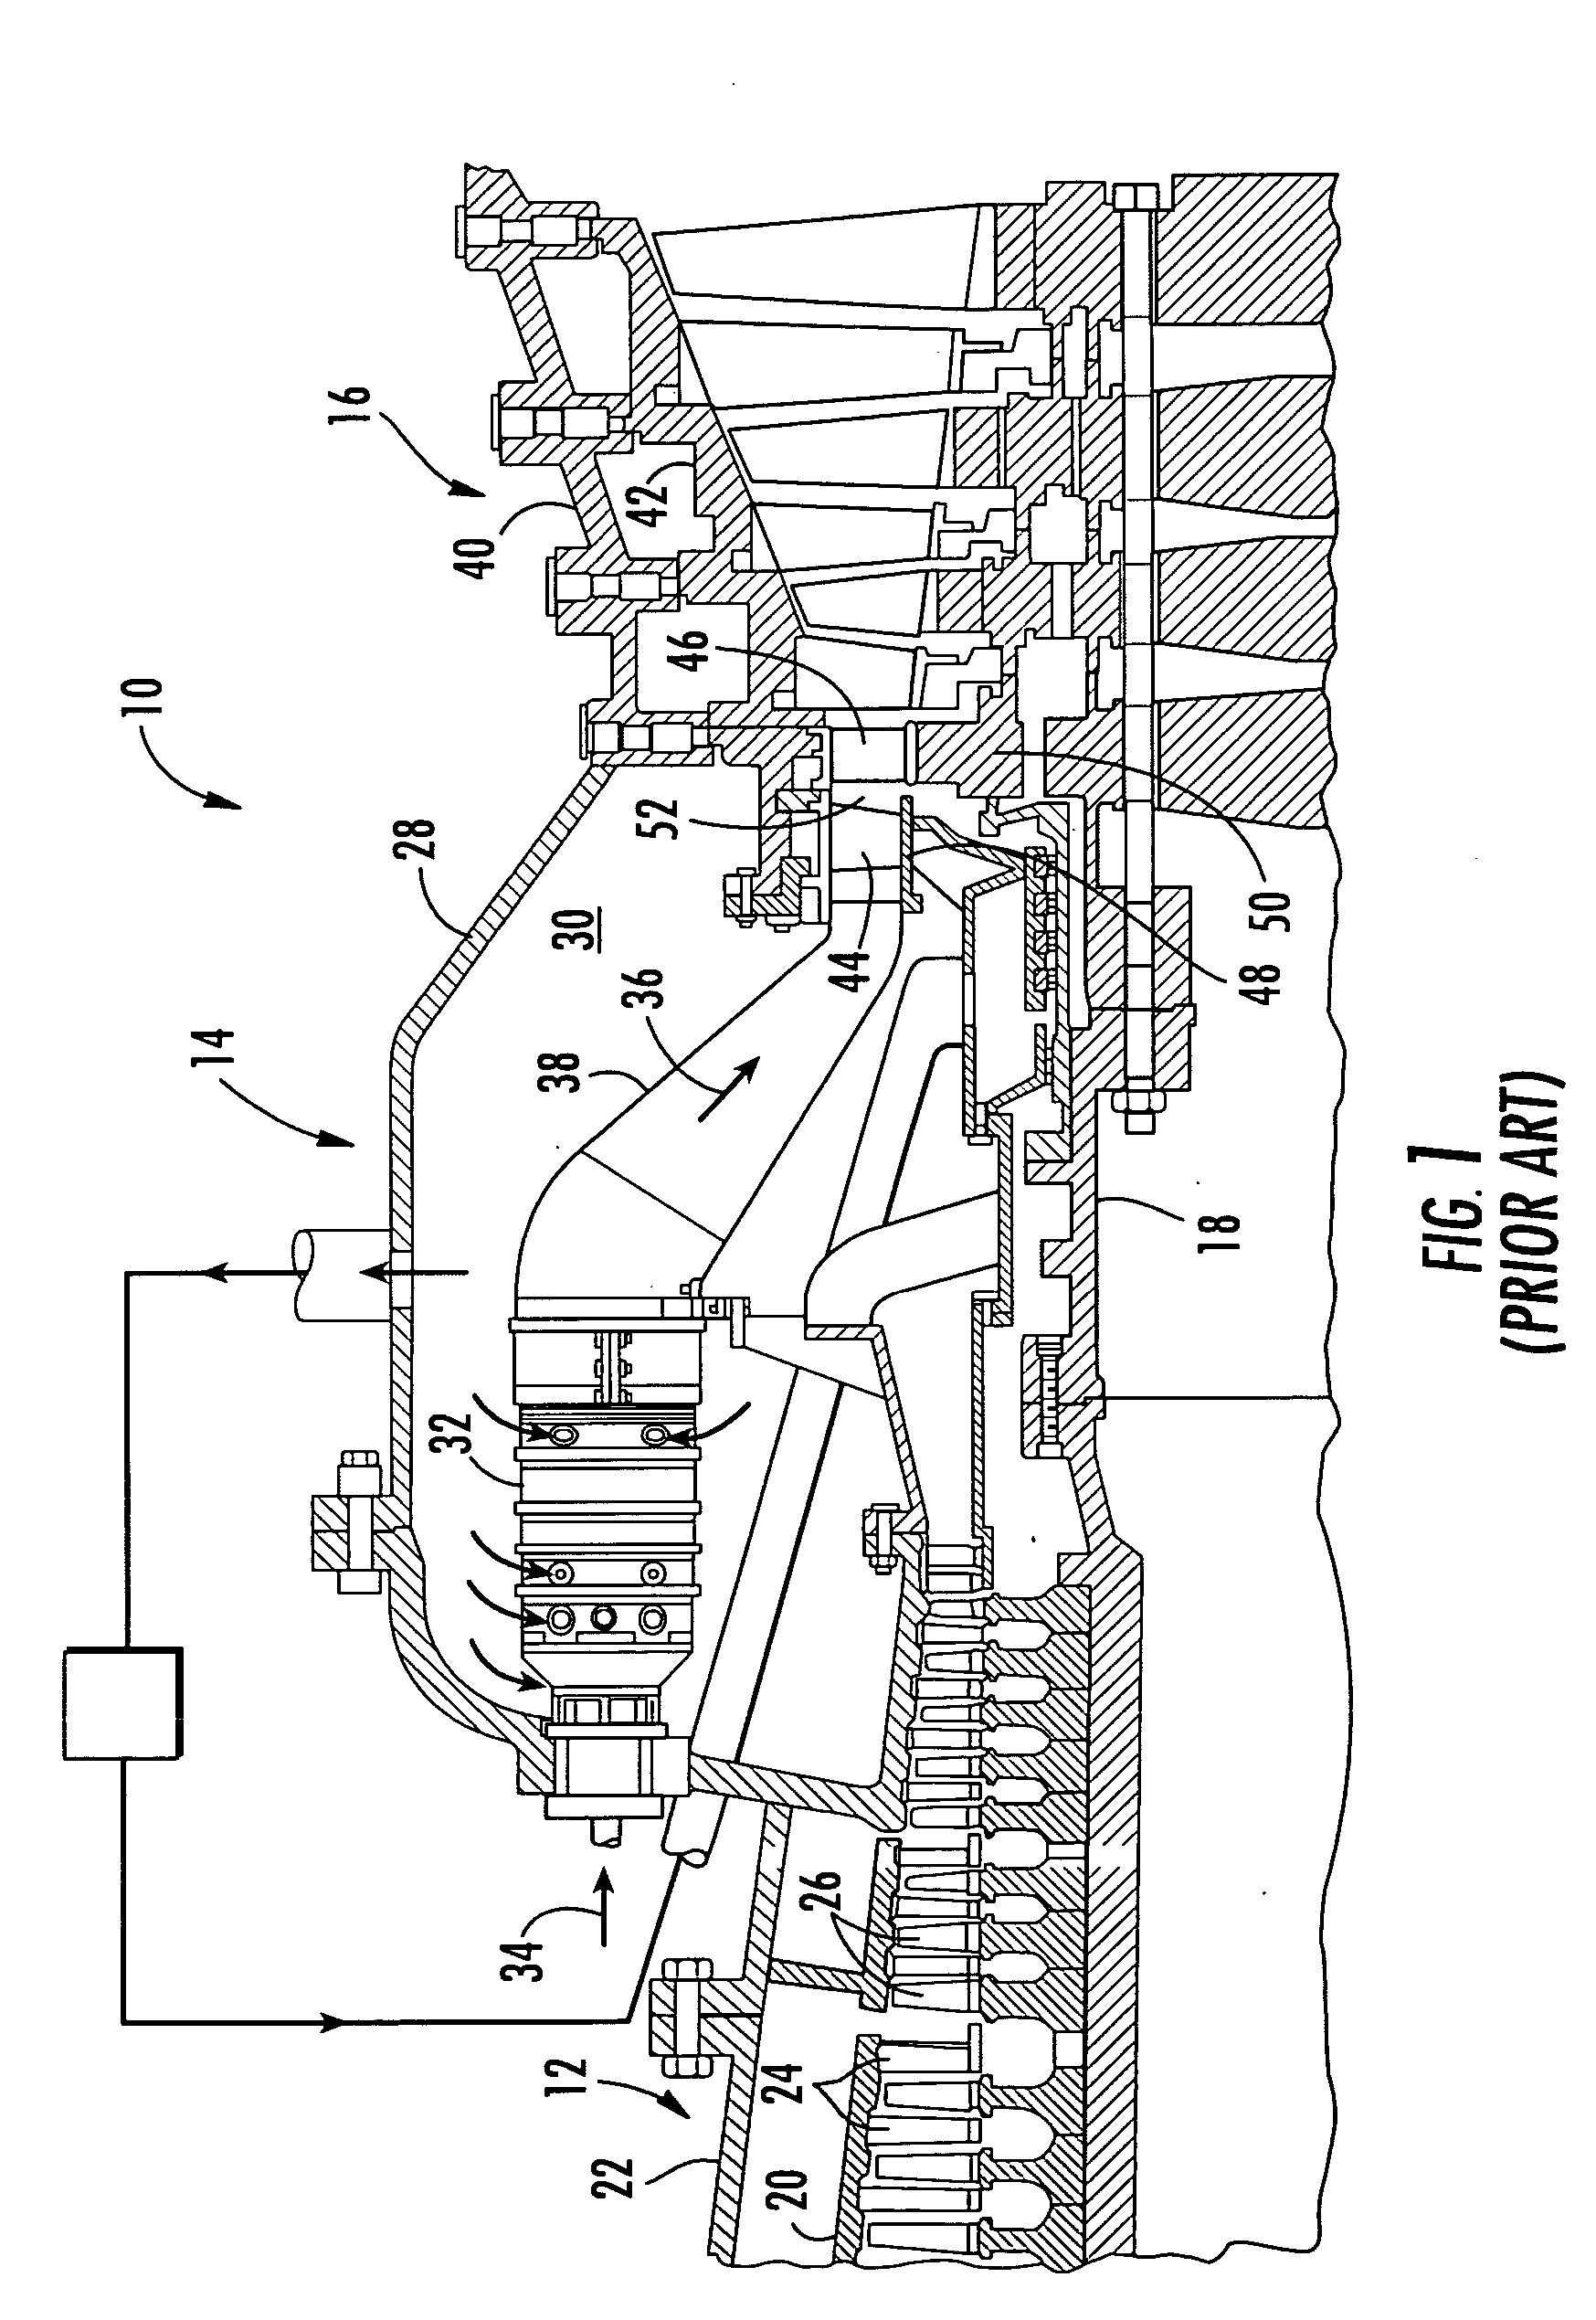 Combustion transition duct providing stage 1 tangential turning for turbine engines